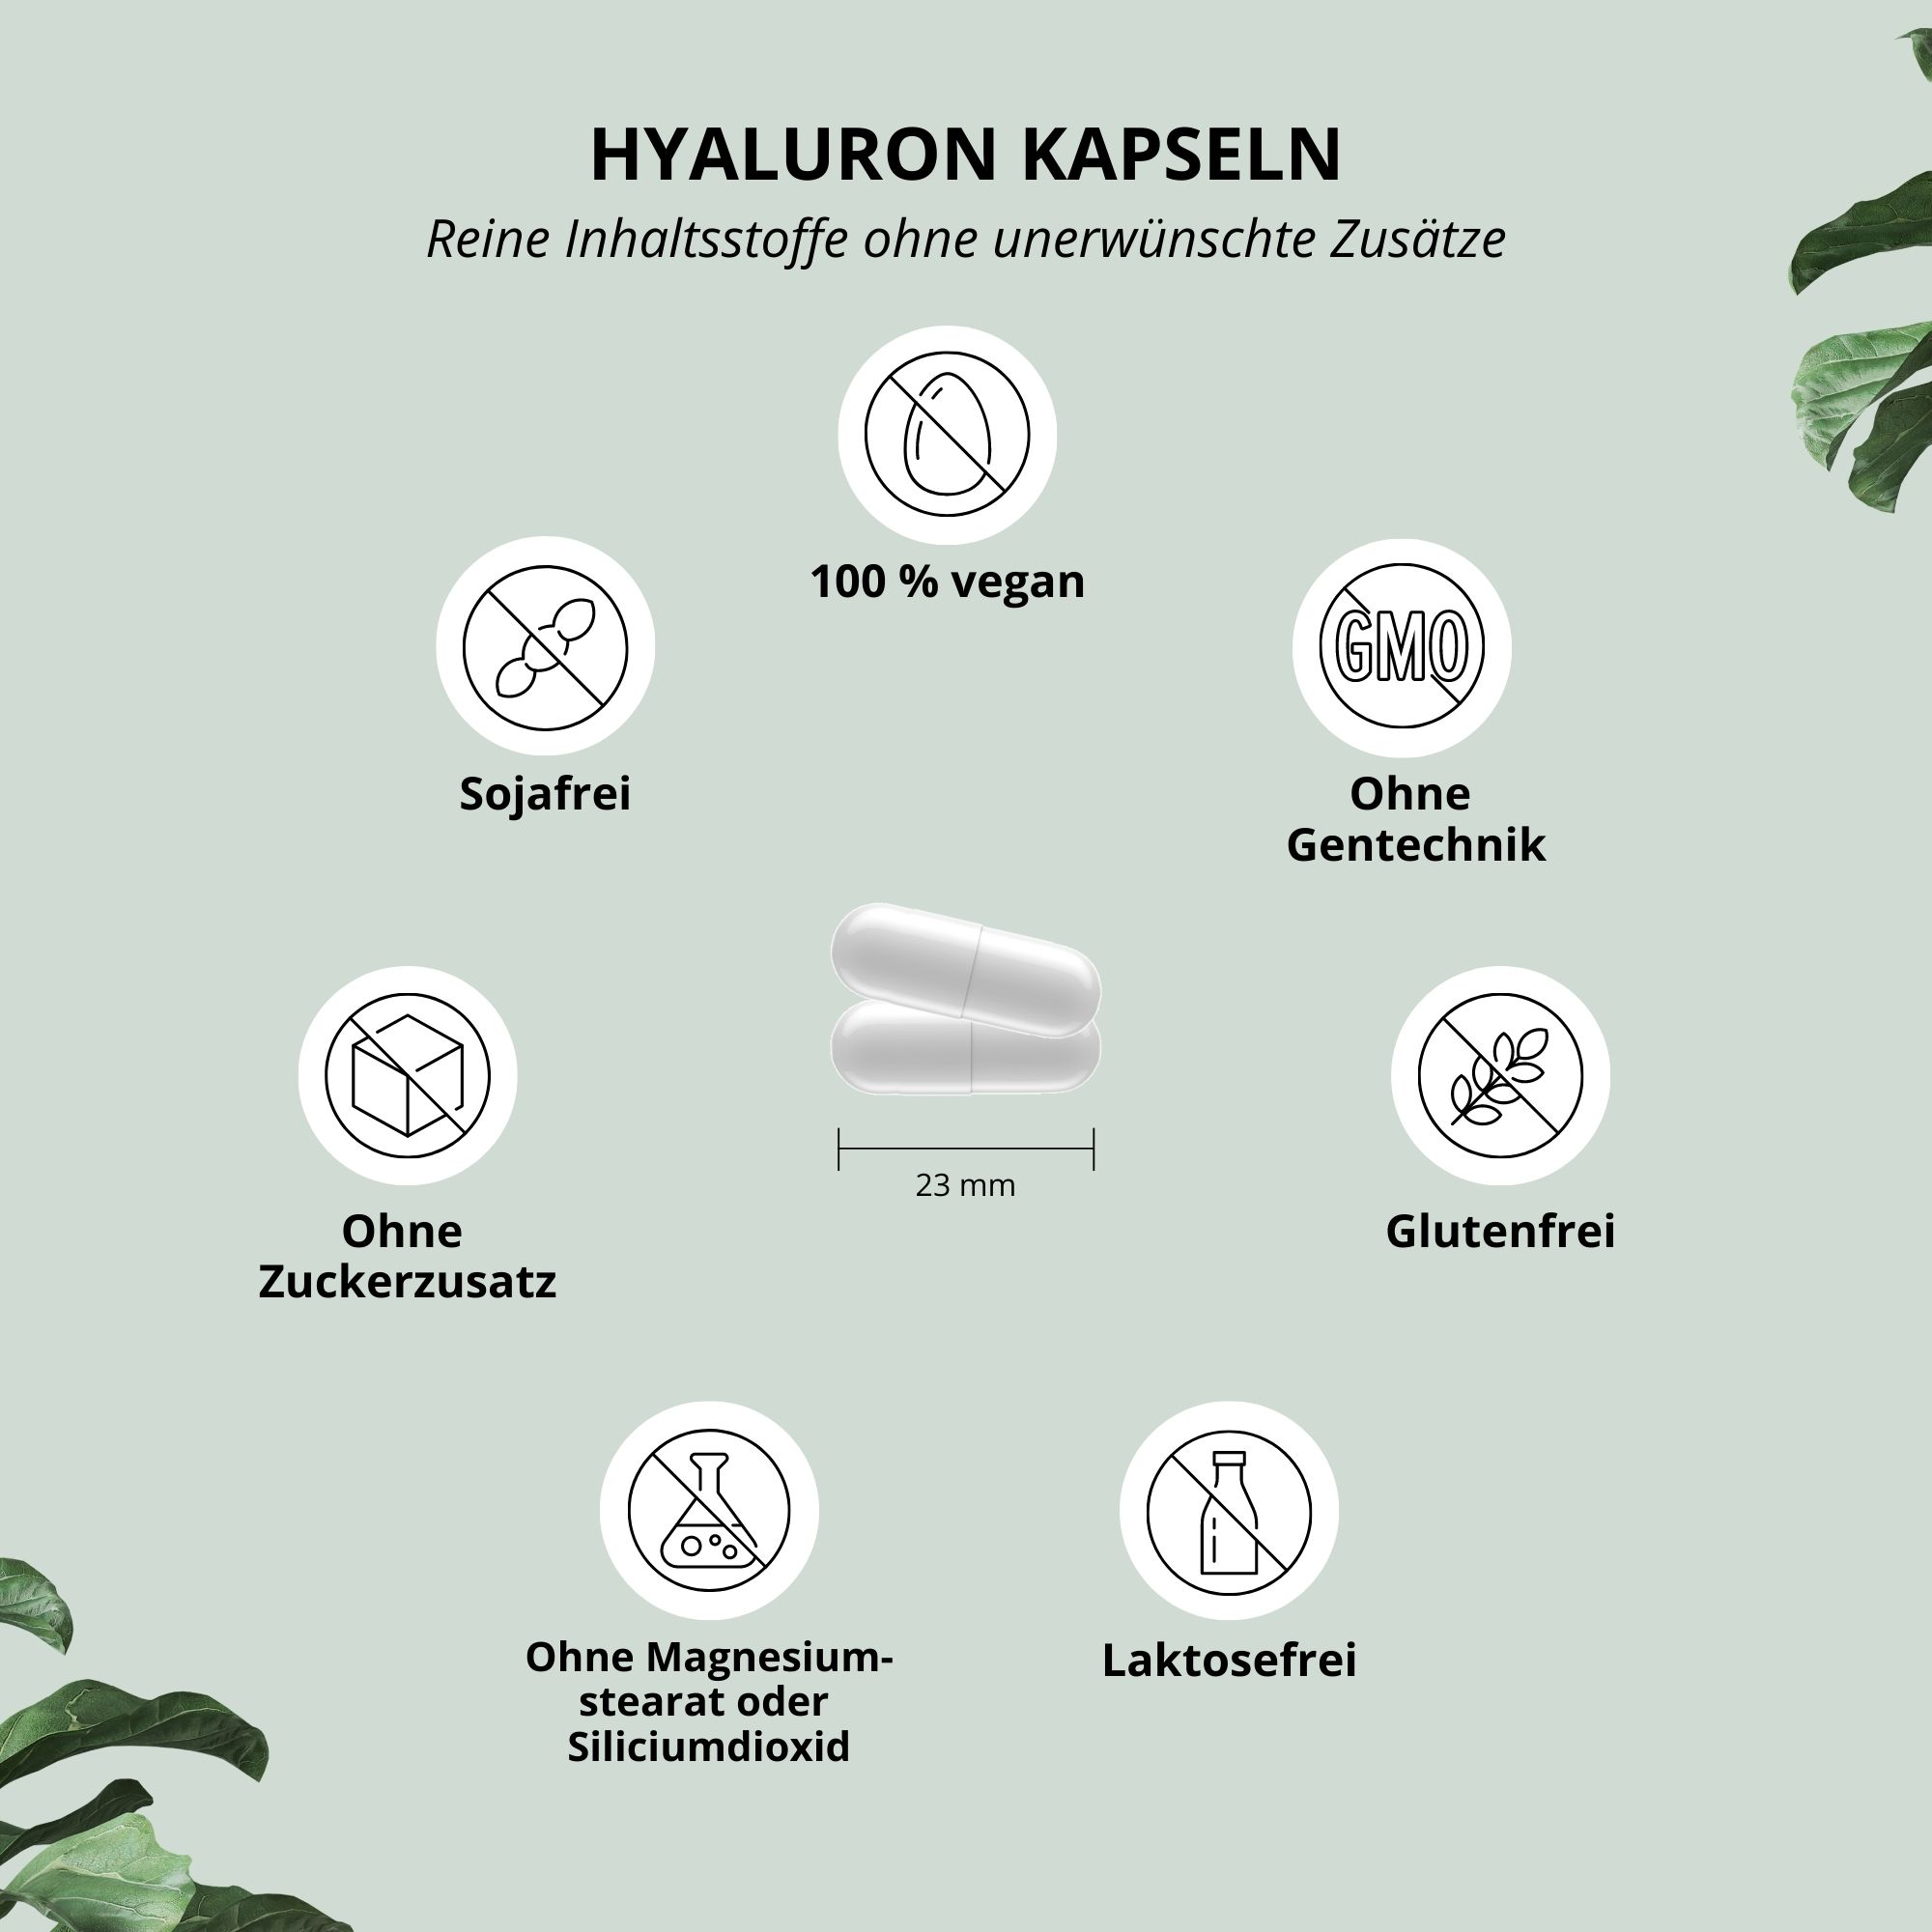 Hyaluronic capsules